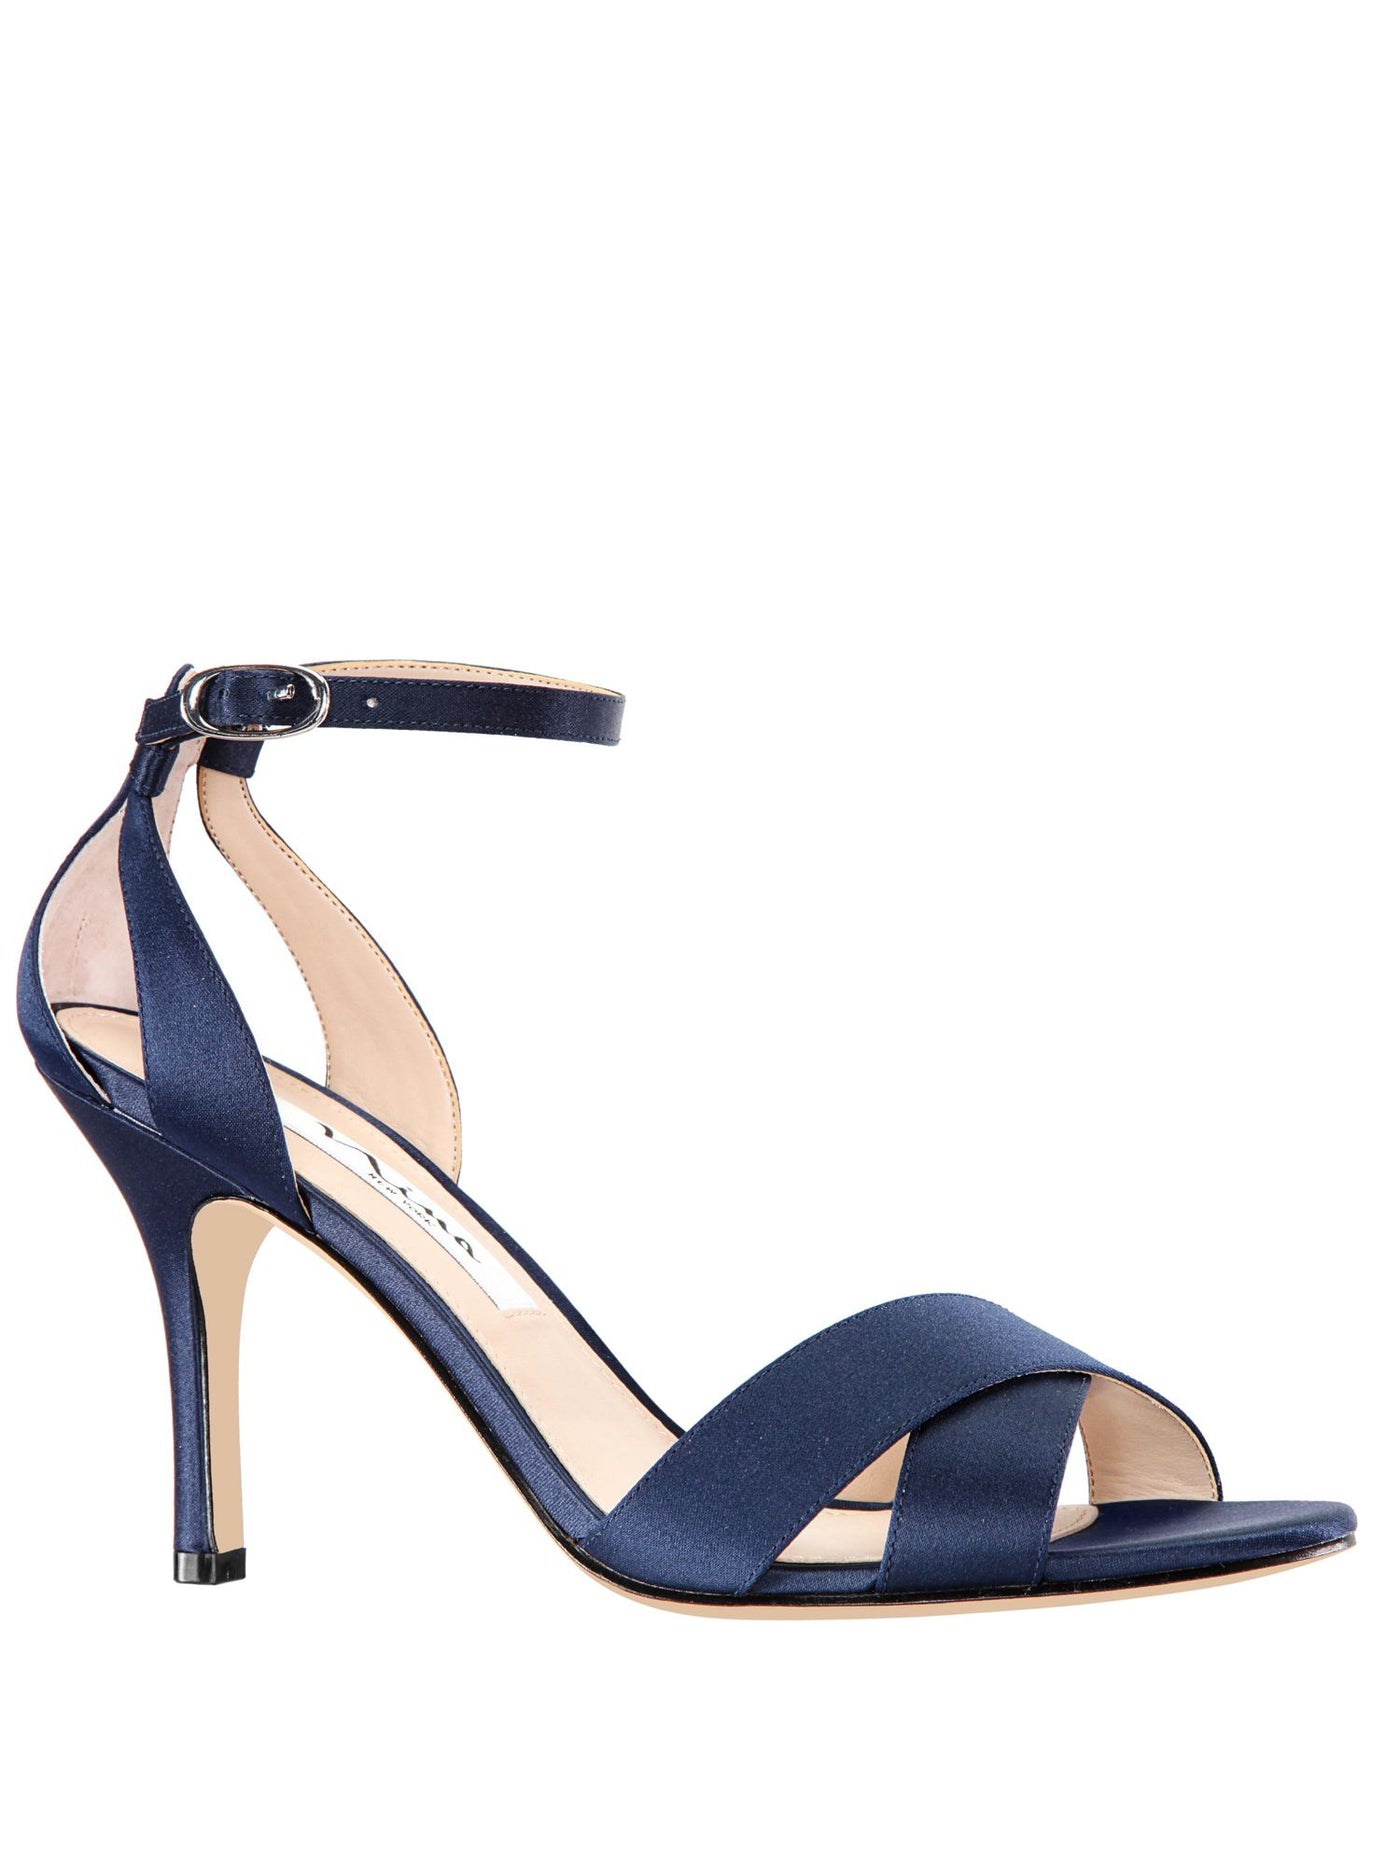 NINA Womens Navy Crisscross Straps Ankle Strap Padded Venus Round Toe Stiletto Buckle Leather Dress Sandals Shoes 7 M